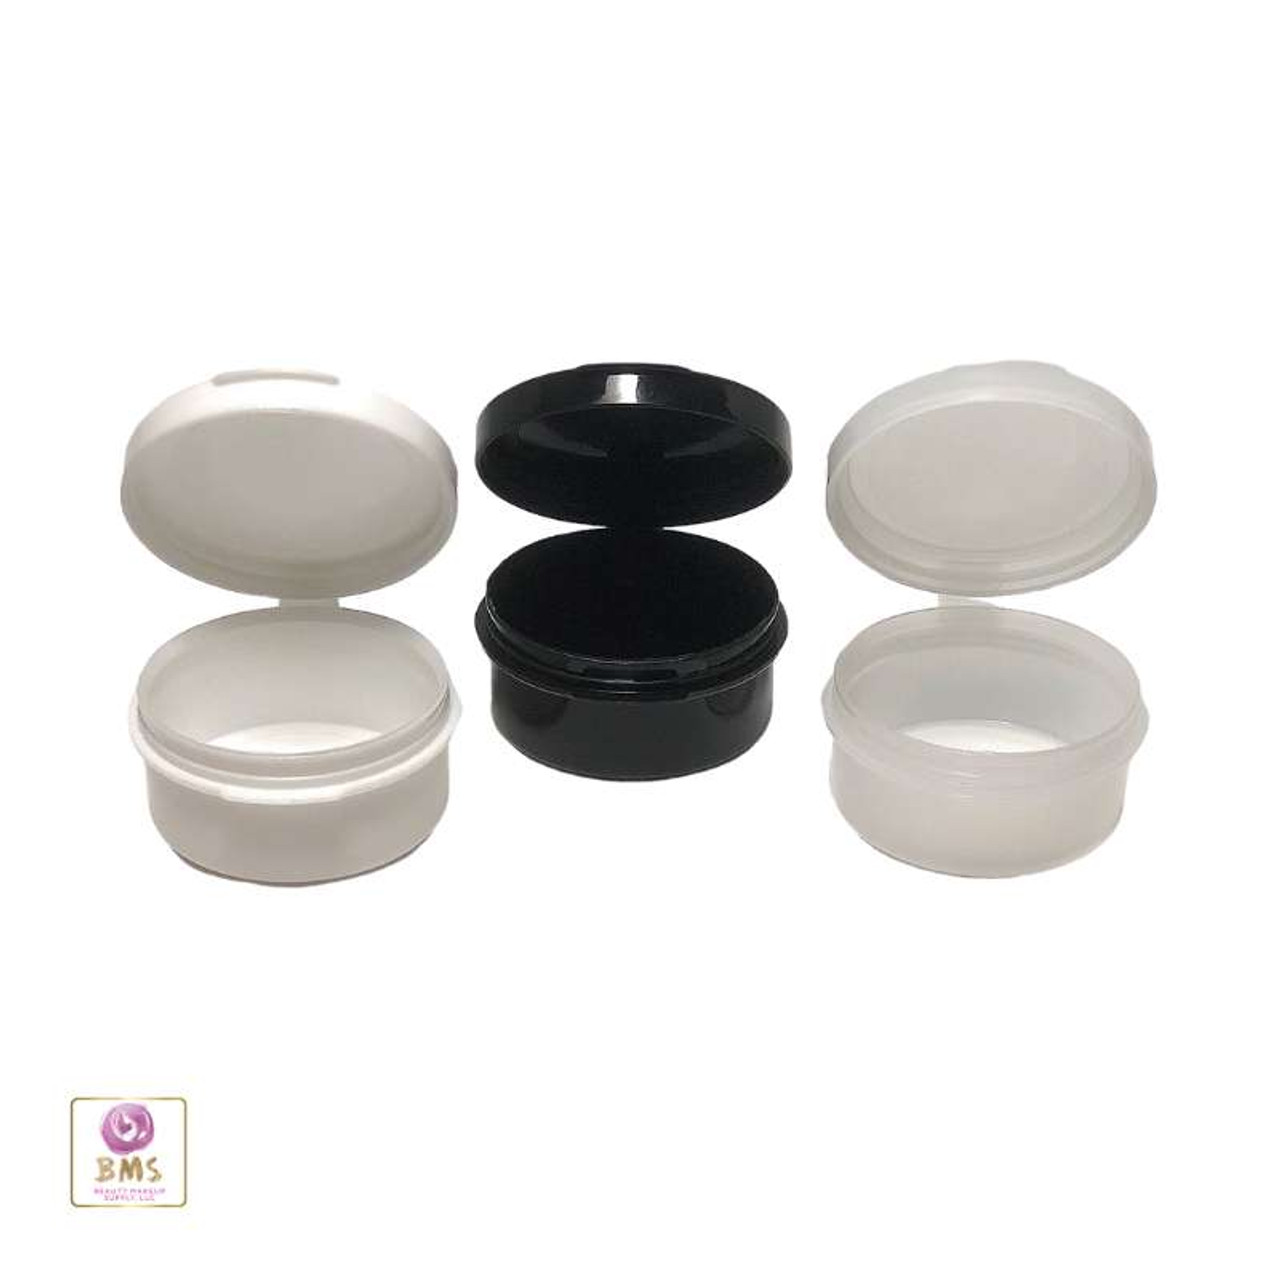 https://cdn11.bigcommerce.com/s-qd7k5gxi/images/stencil/1280x1280/products/270/6427/Cosmetic-Hinged-Lid-Jars-Beauty-Containers-10-Ml-Natural-White-Black-5098-5095-5099-Beauty-Makeup-Supply_5533__95502.1660976252.jpg?c=2